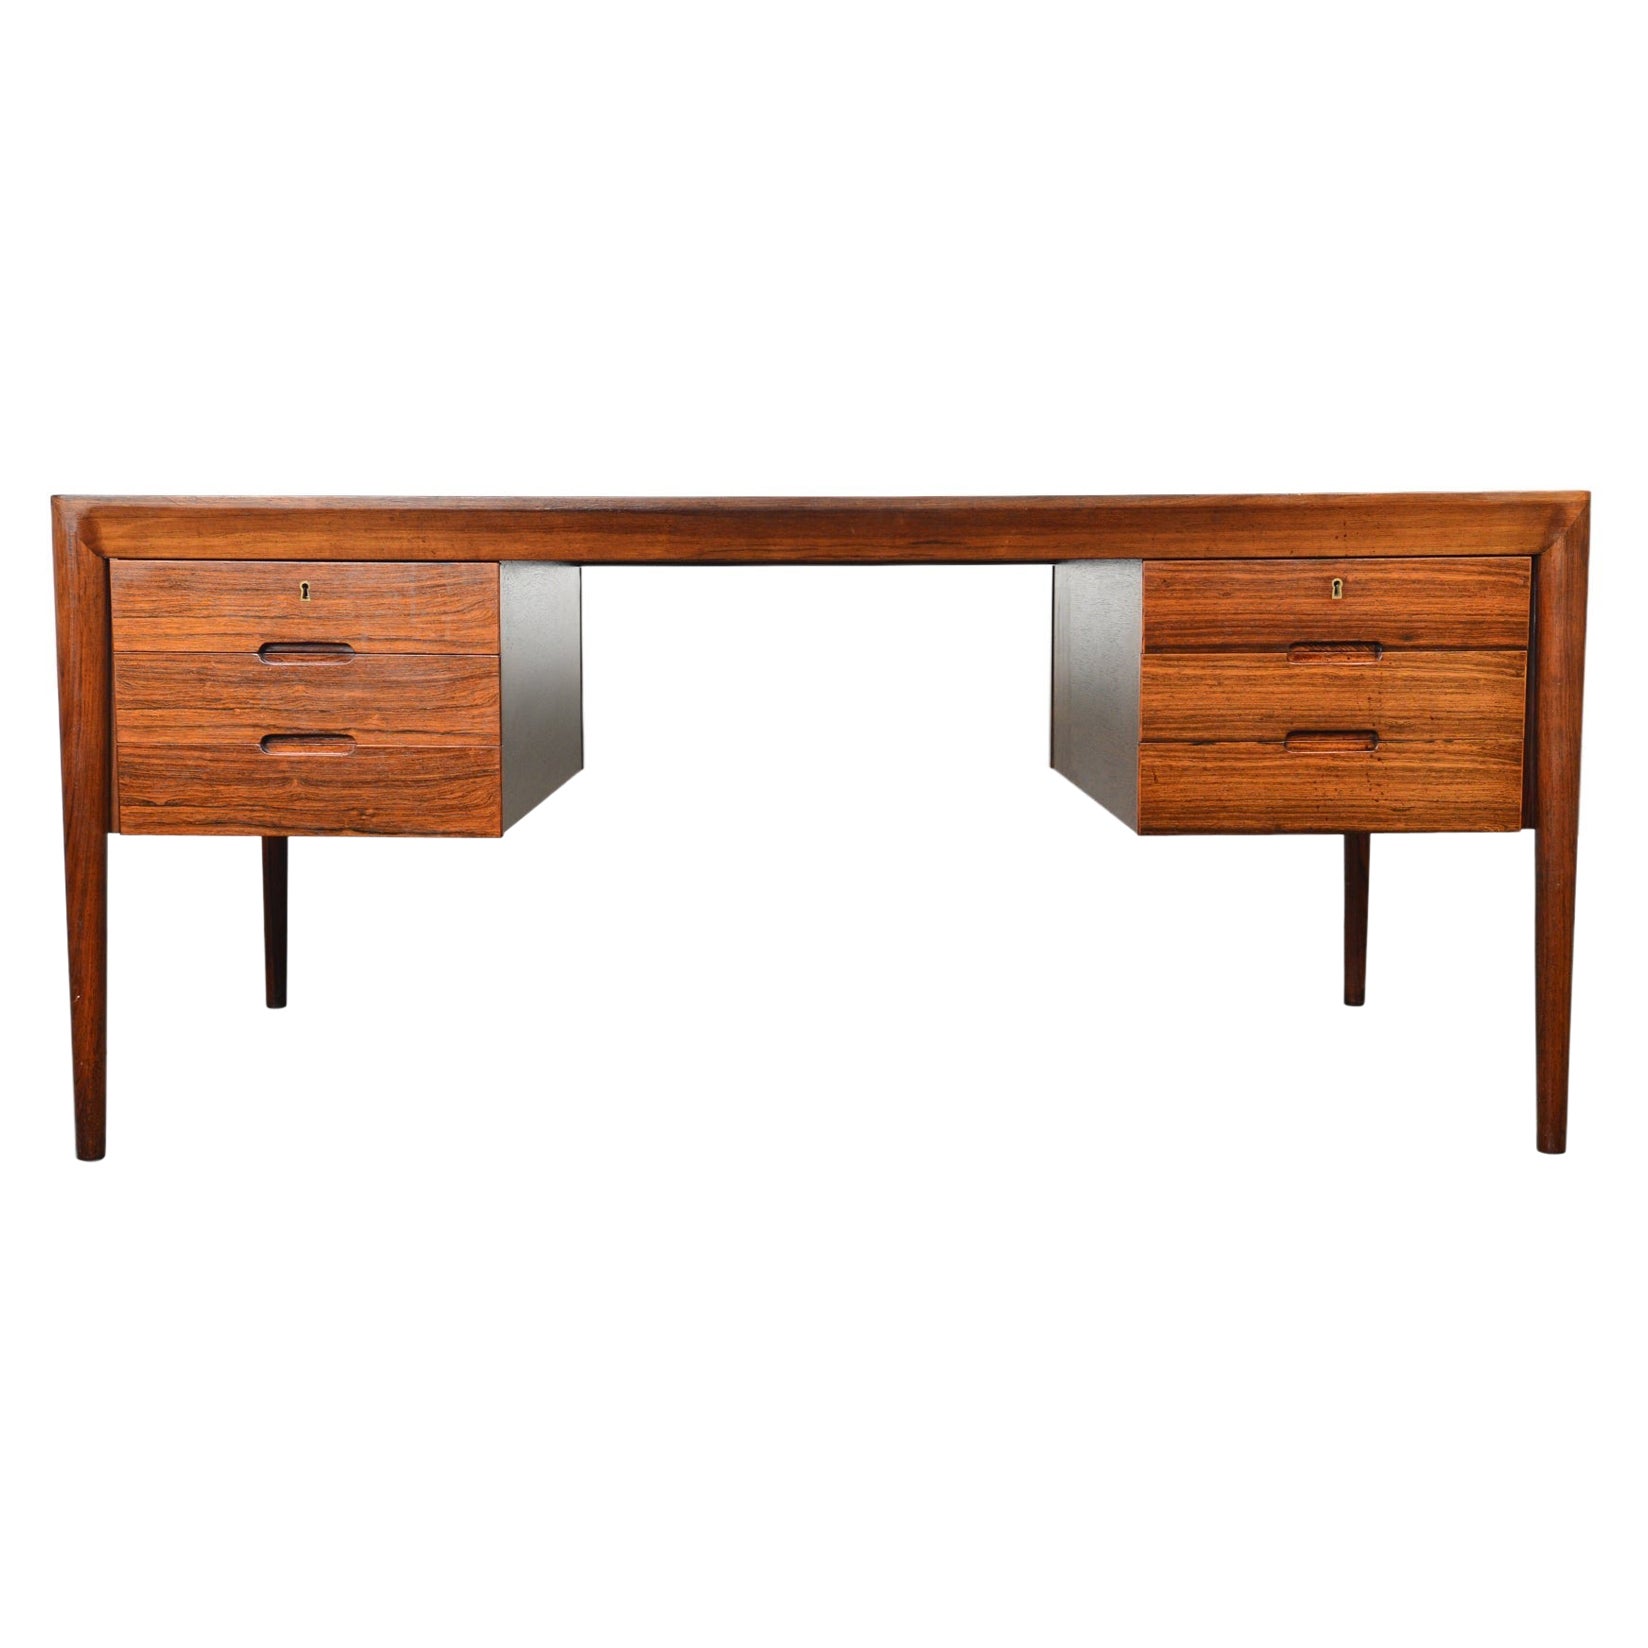 Executive rosewood writing desk by erik riisager hansen For Sale